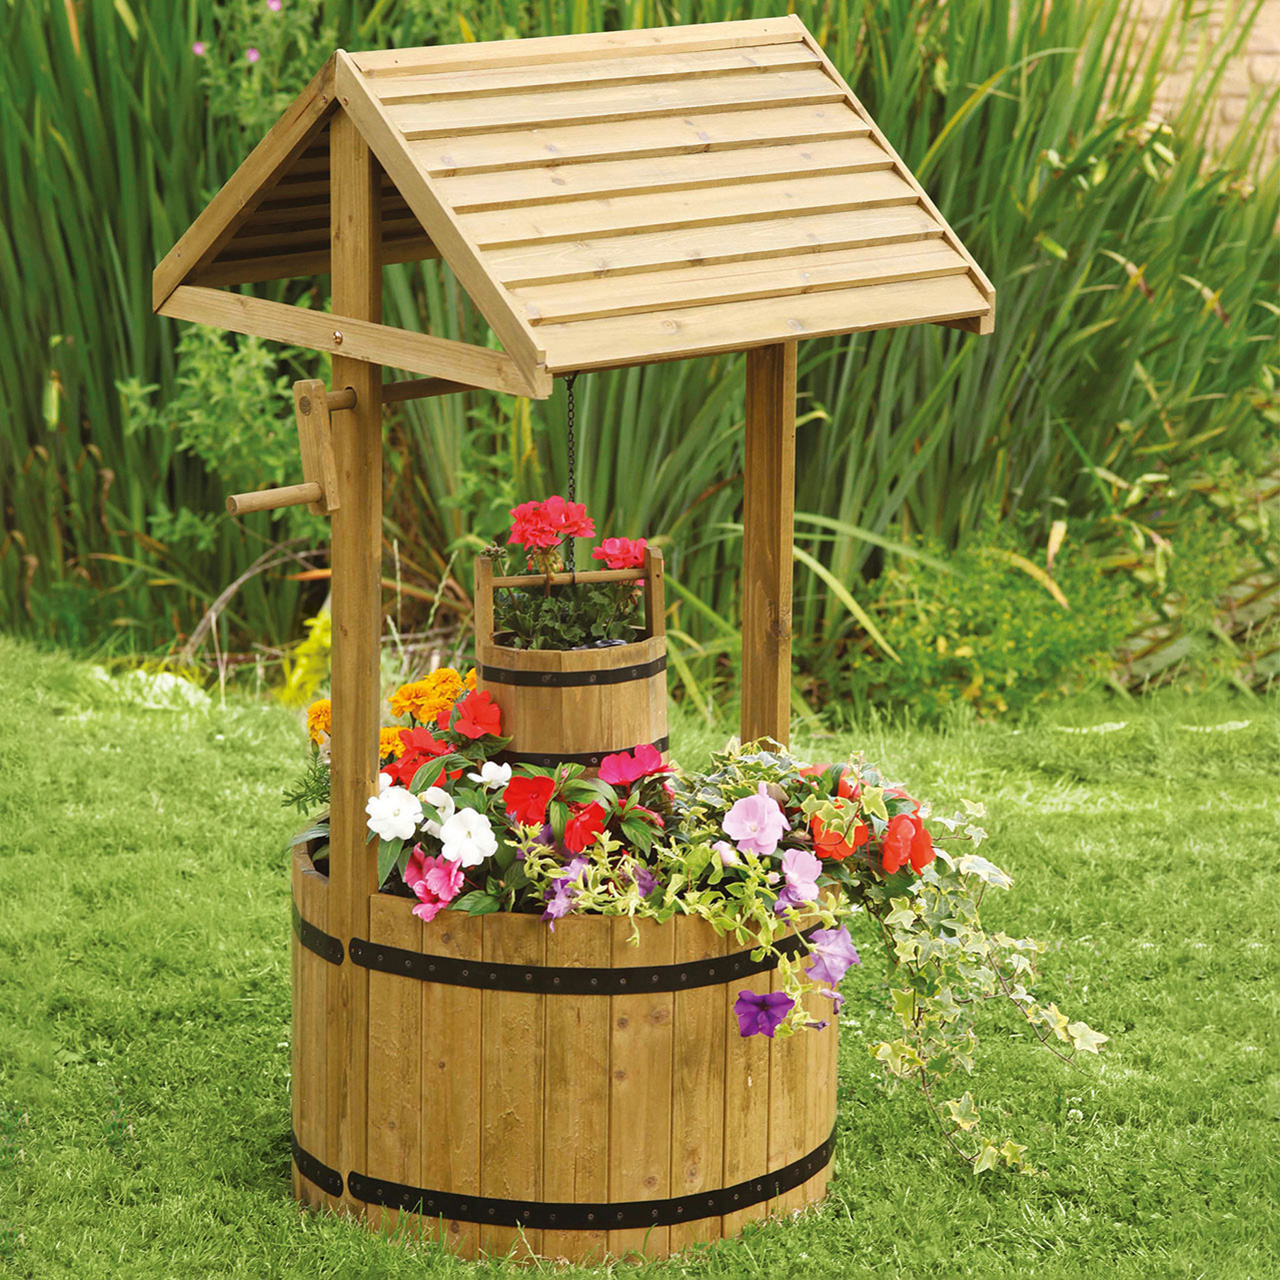 Wooden Wishing Well Planter